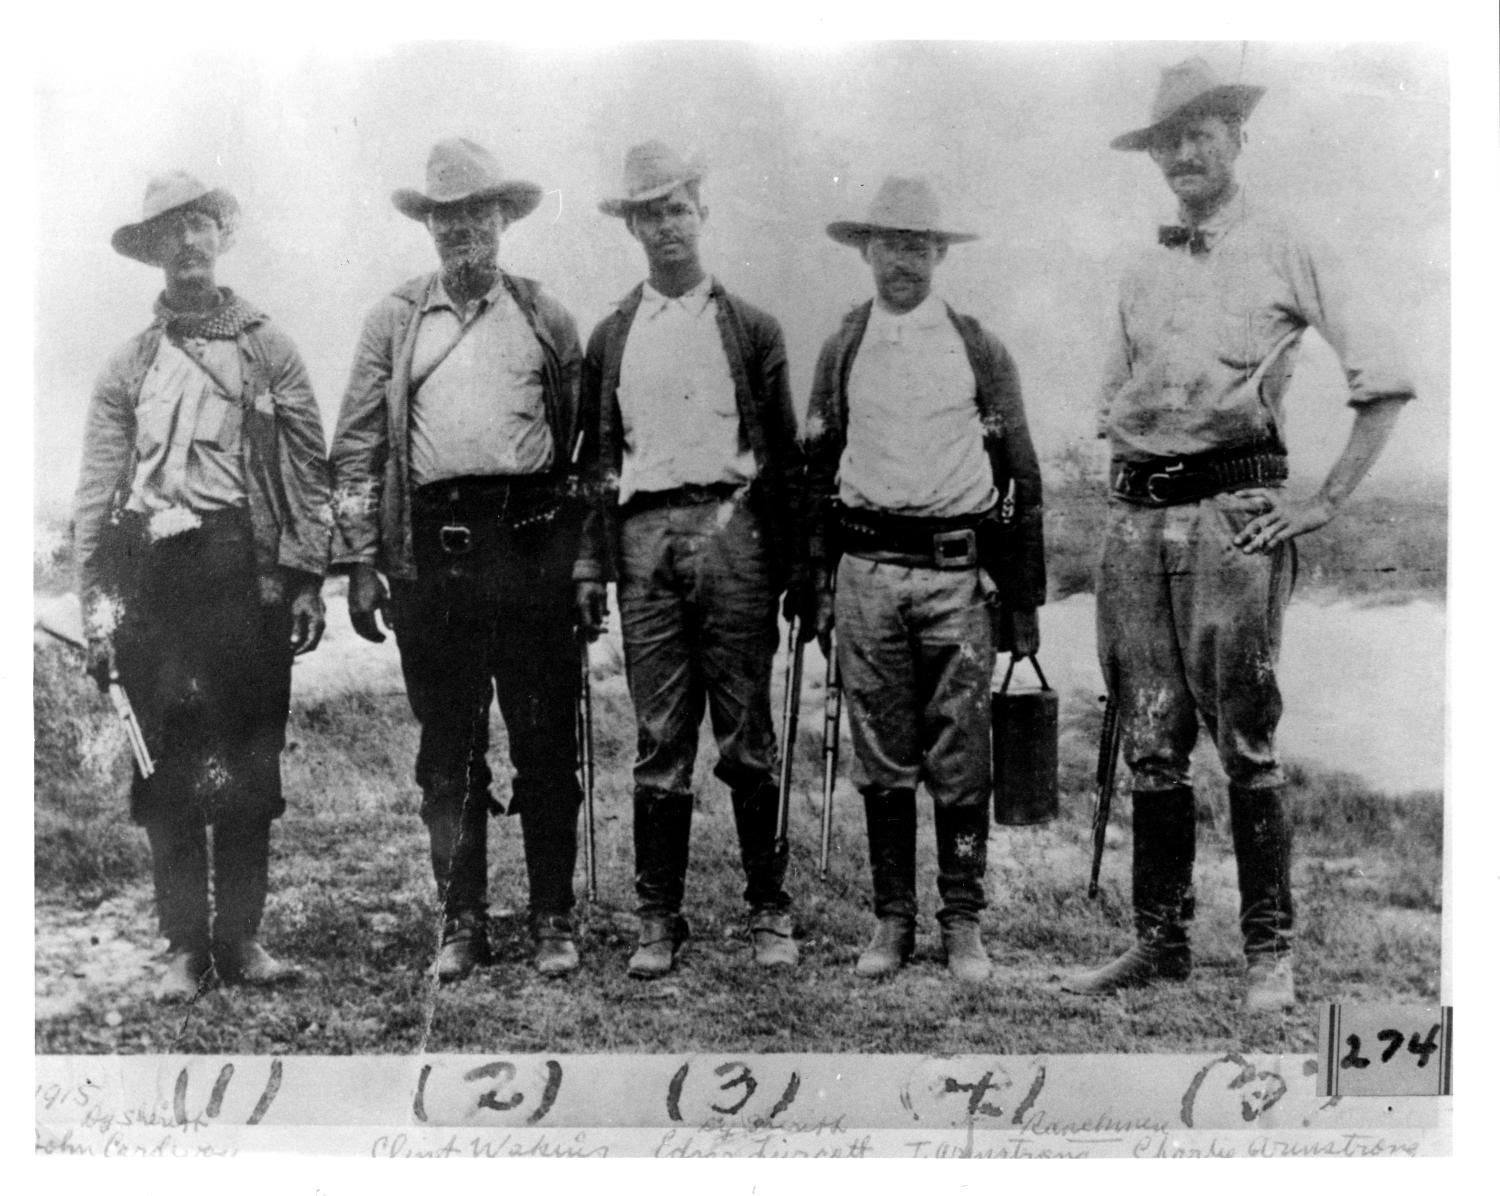 Texas Rangers in 1915 - The Portal to Texas History